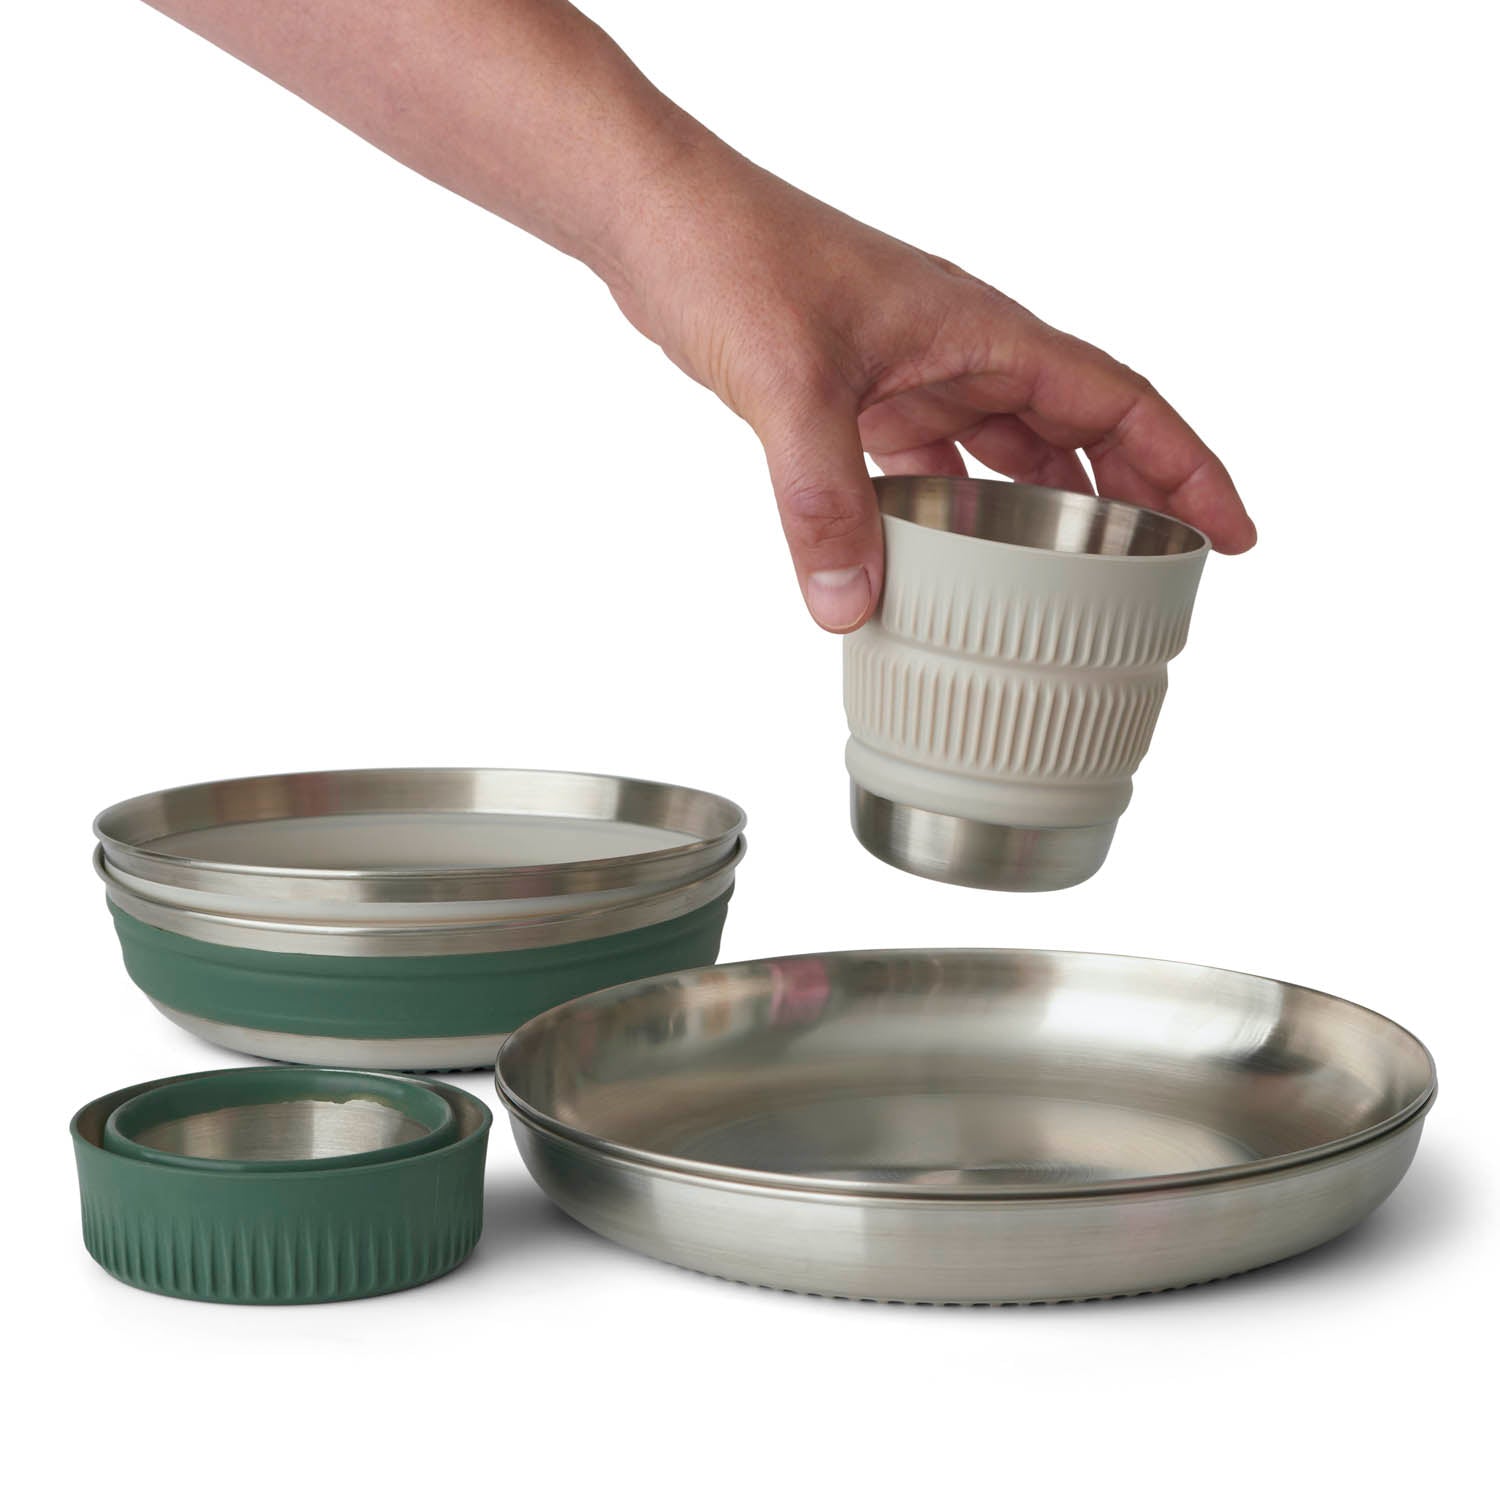 Detour Stainless Steel Collapsible Dinnerware Set - [6 Piece]